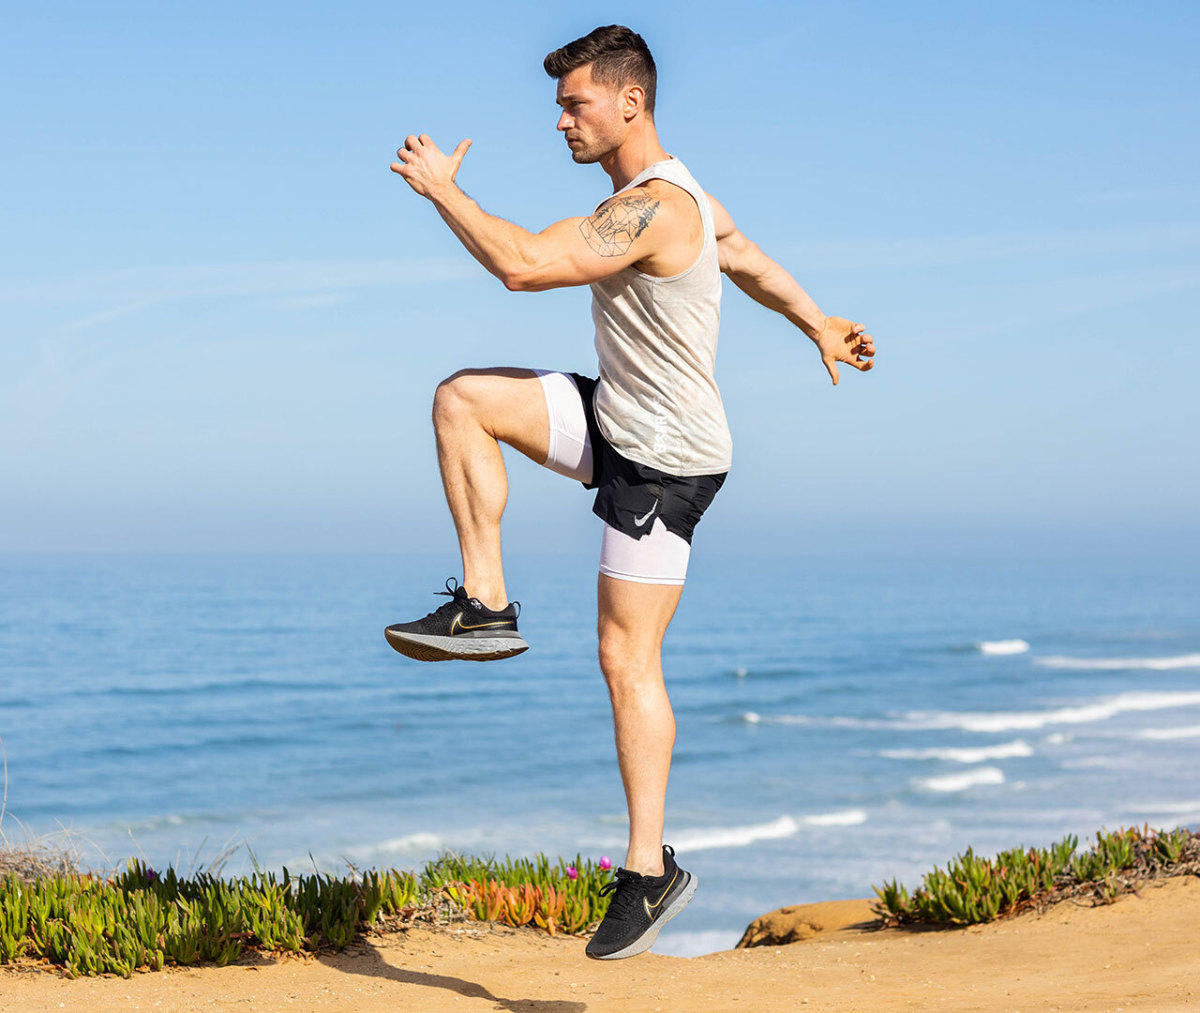 Caucasian man in white tank top and black shorts in jumping position from lunge on beach with ocean in background